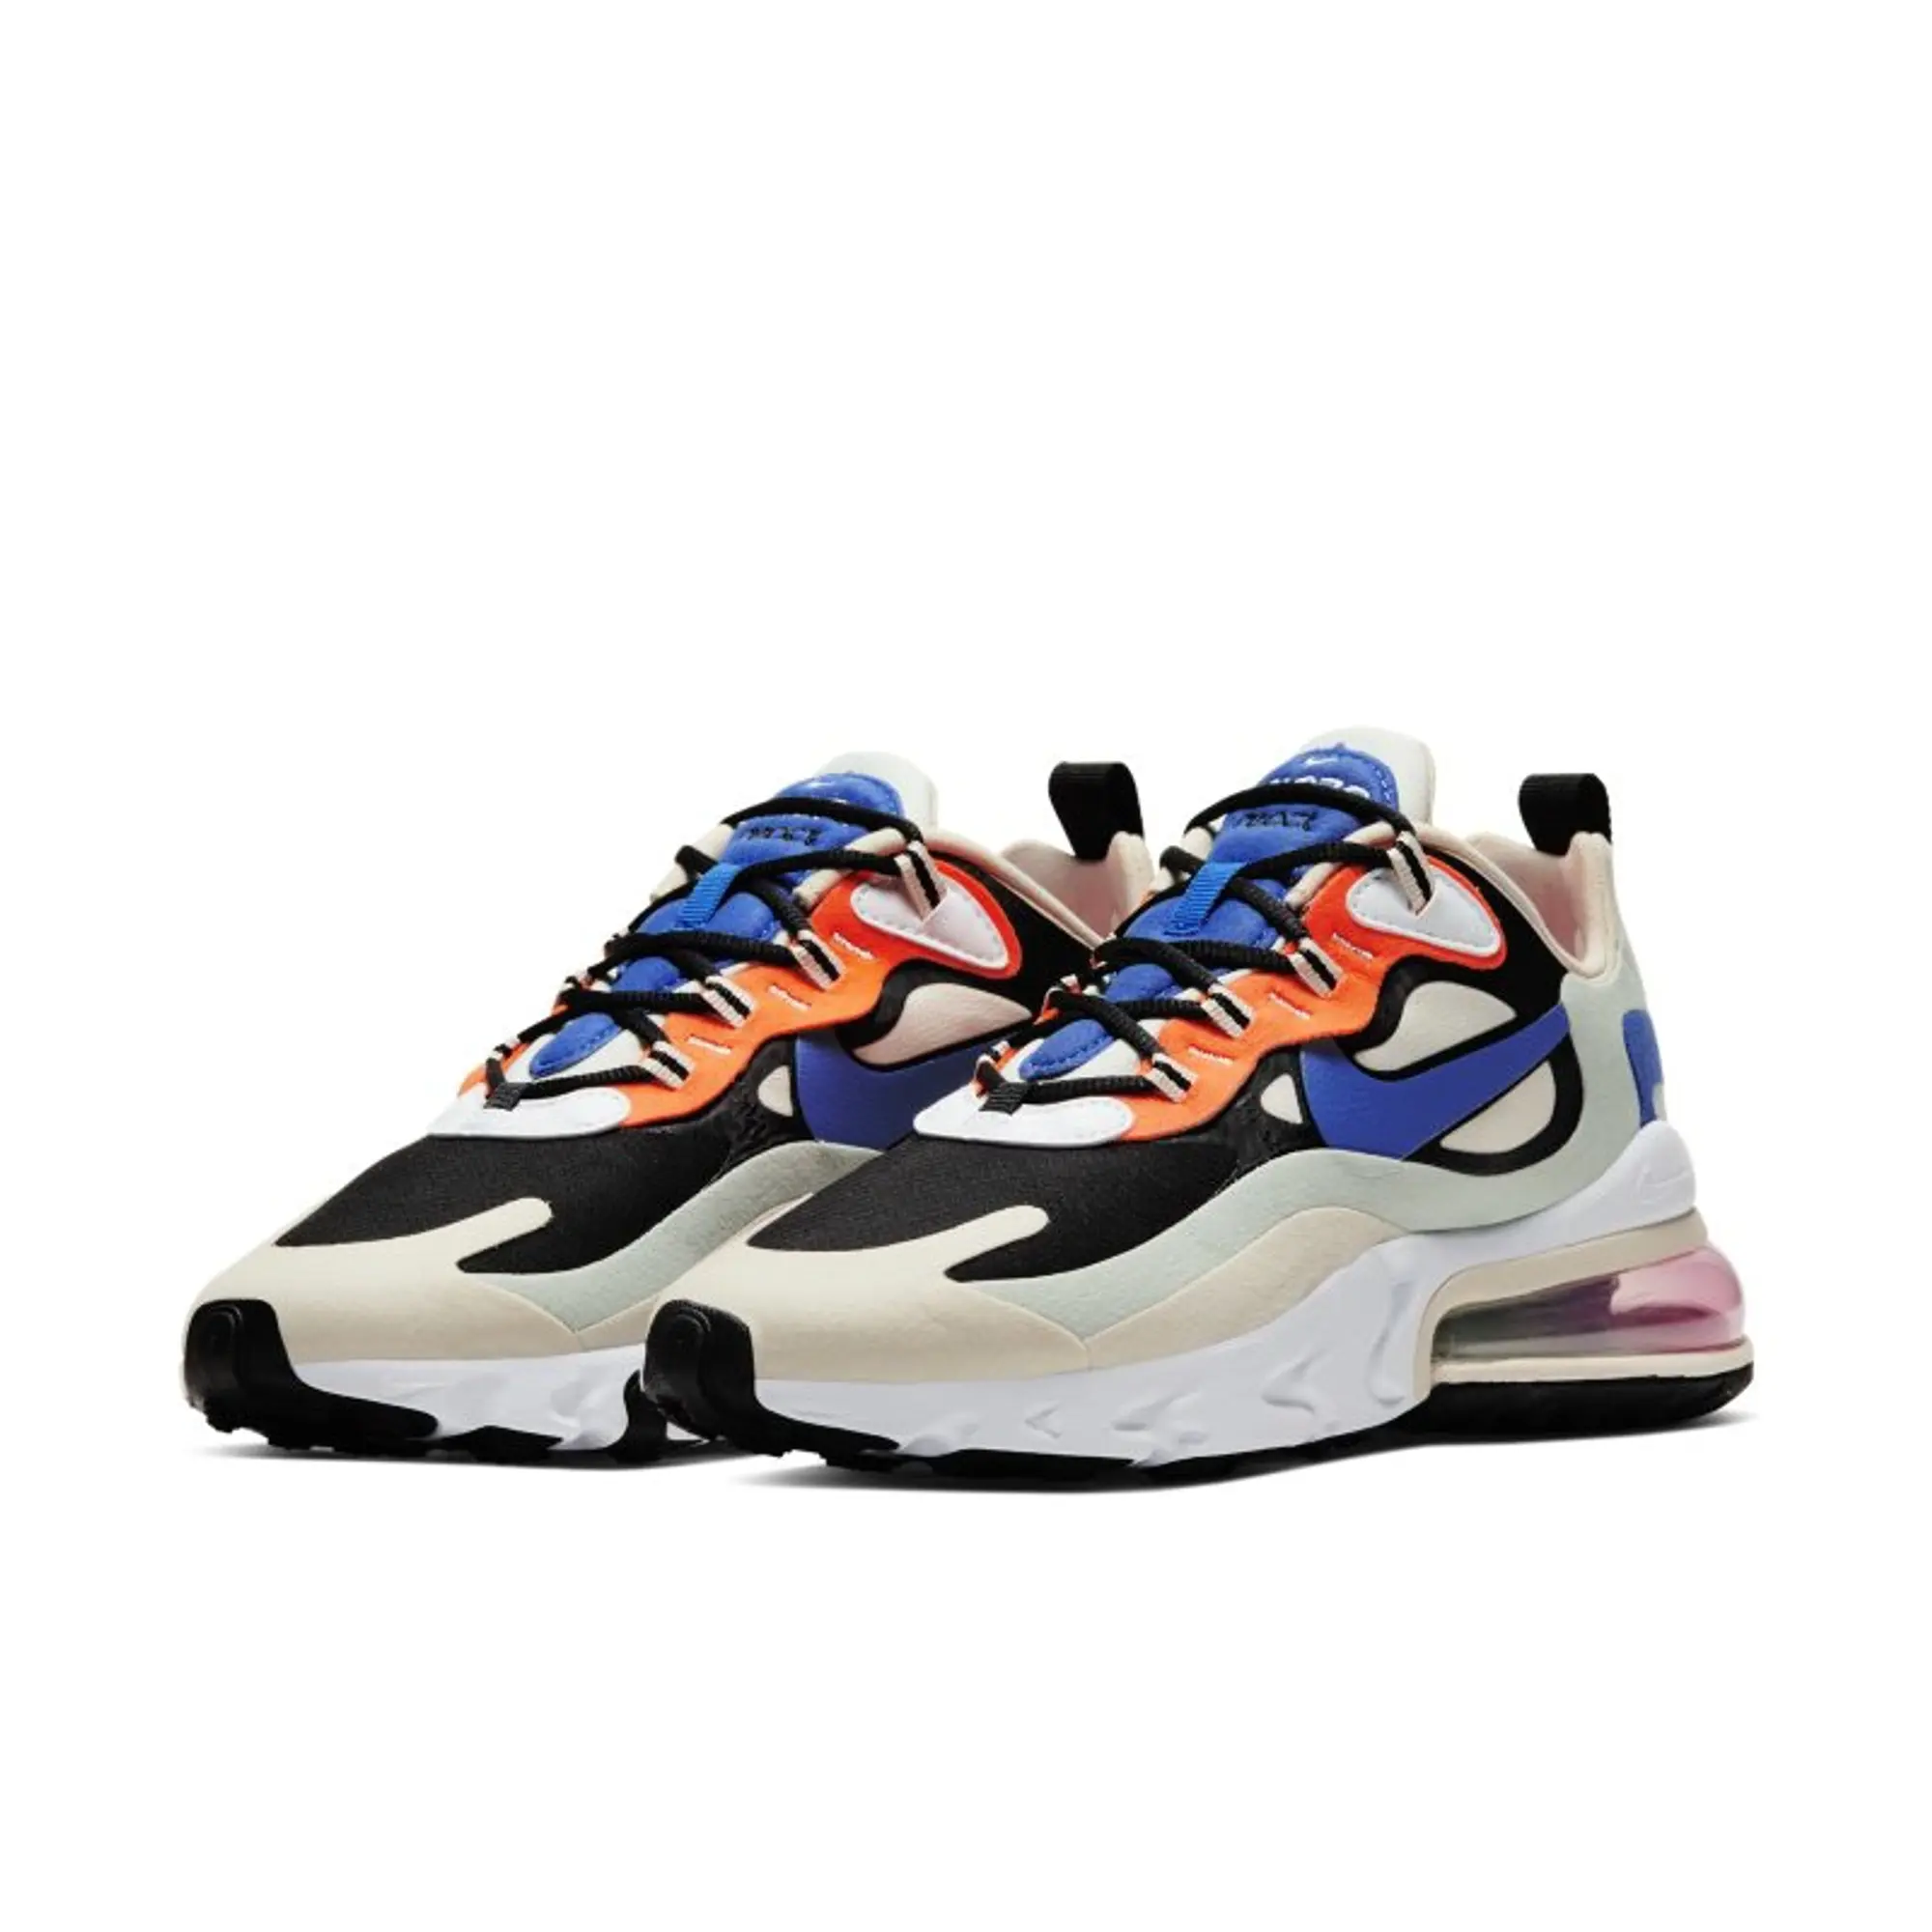 Nike WMNS Air Max 270 React Fossil Pistachio Frost